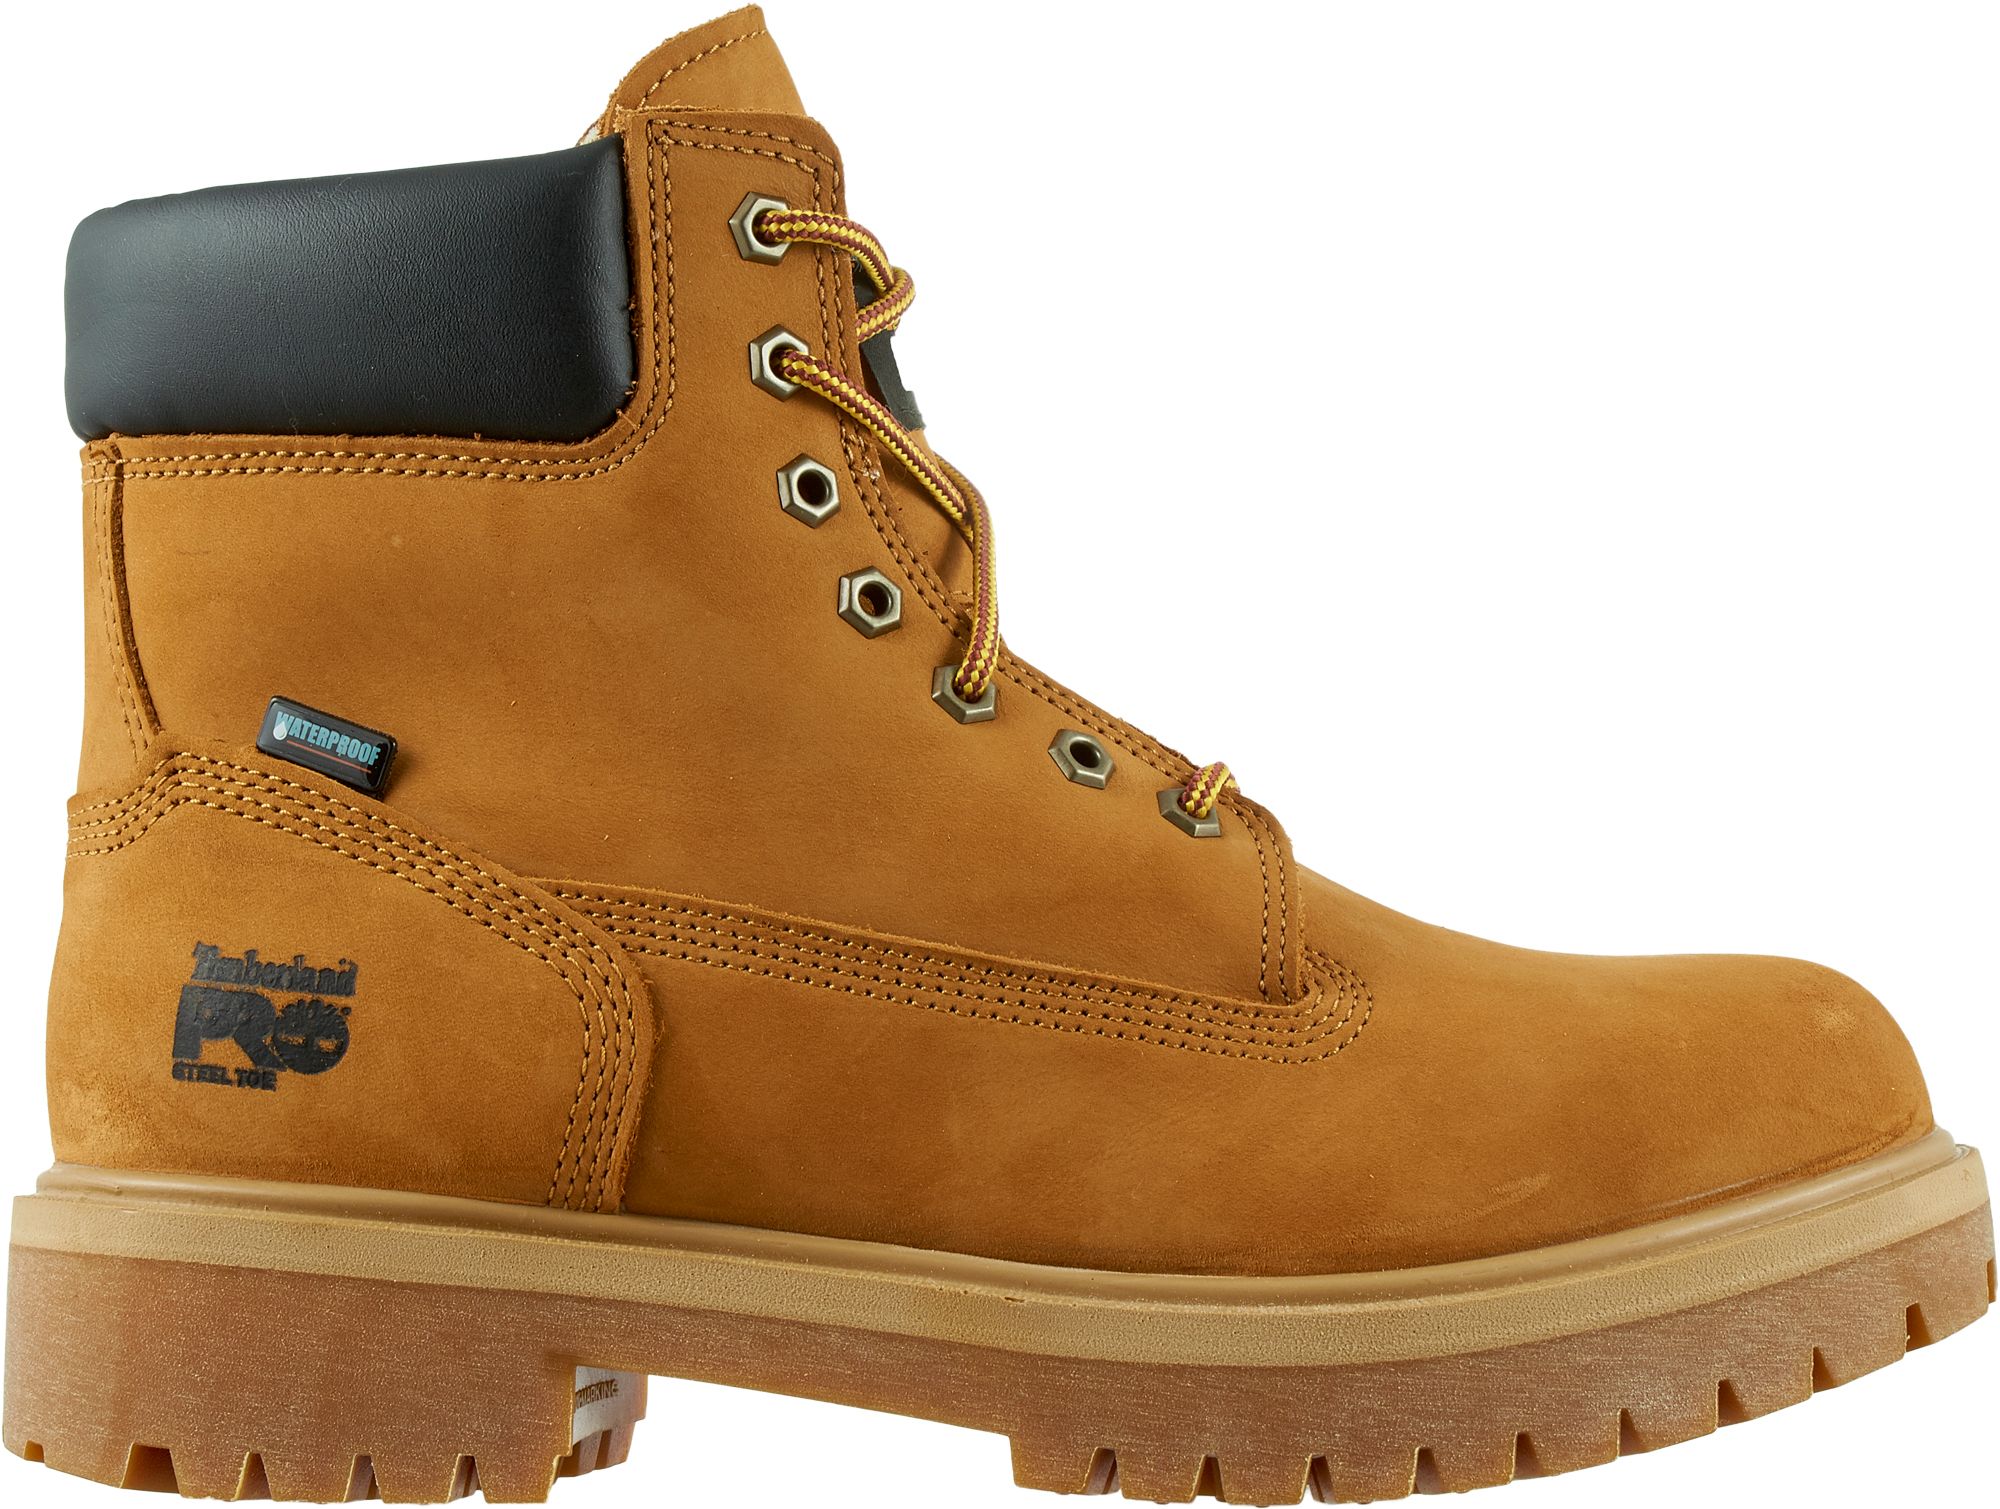 men's timberland work boots on sale